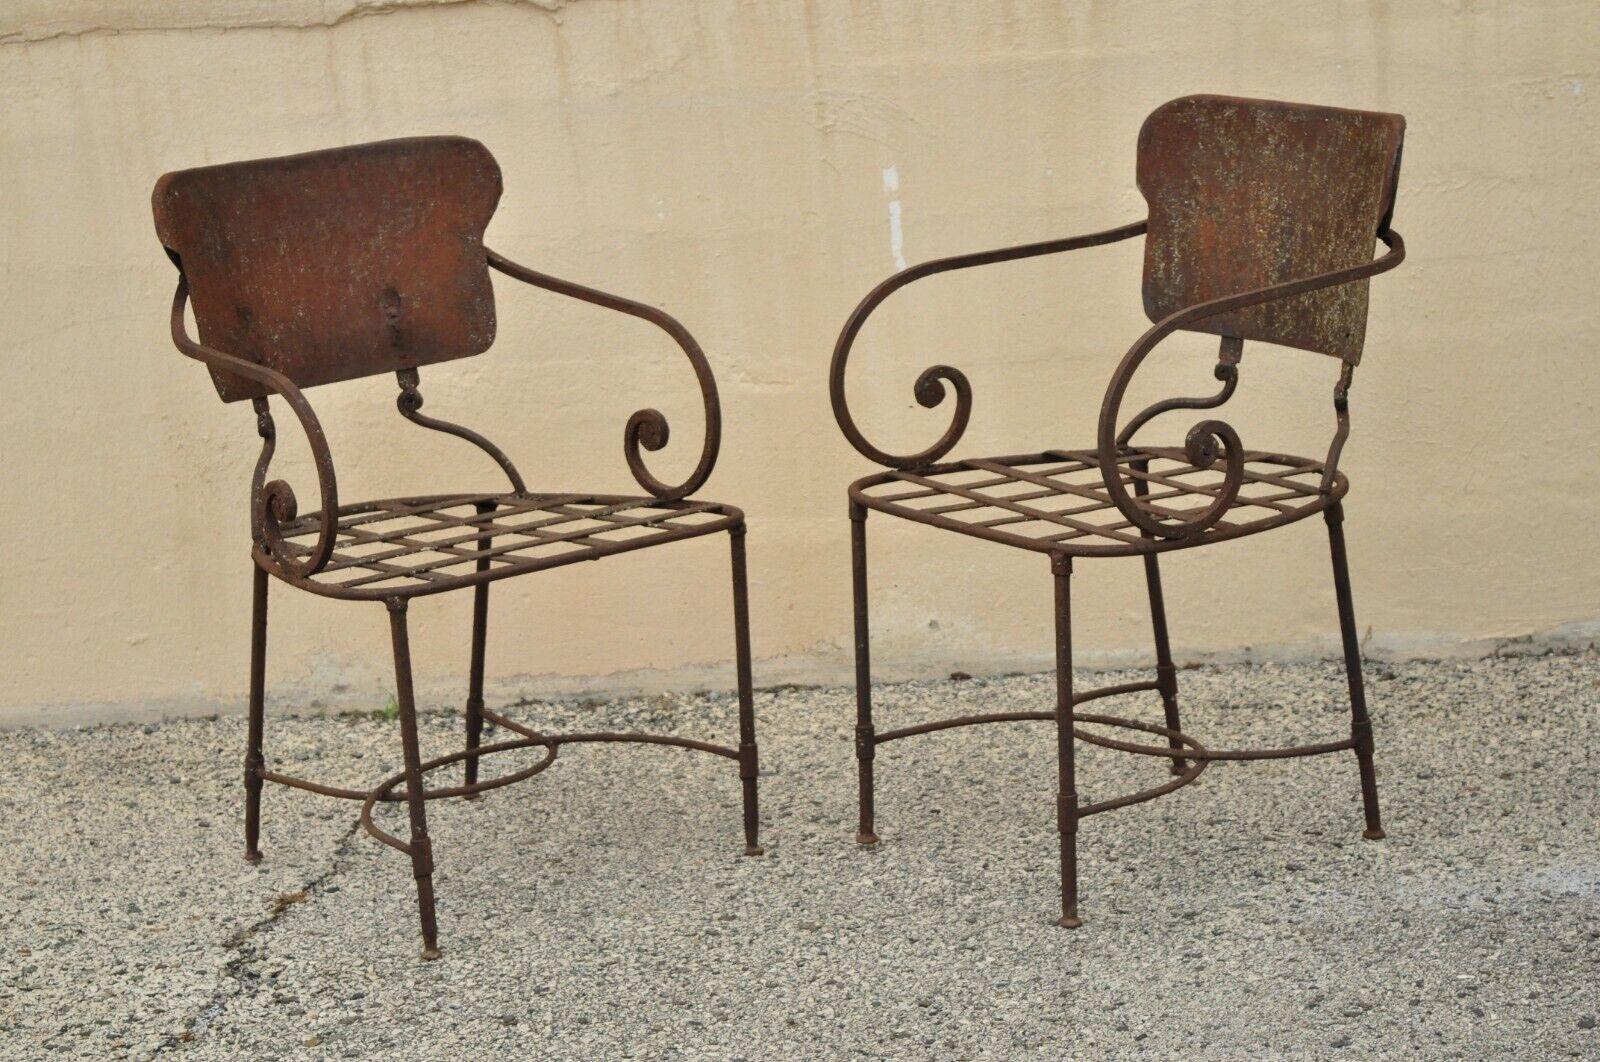 Antique Neoclassical Wrought Iron Outdoor Garden Scrolling Arm Chairs, a Pair 7